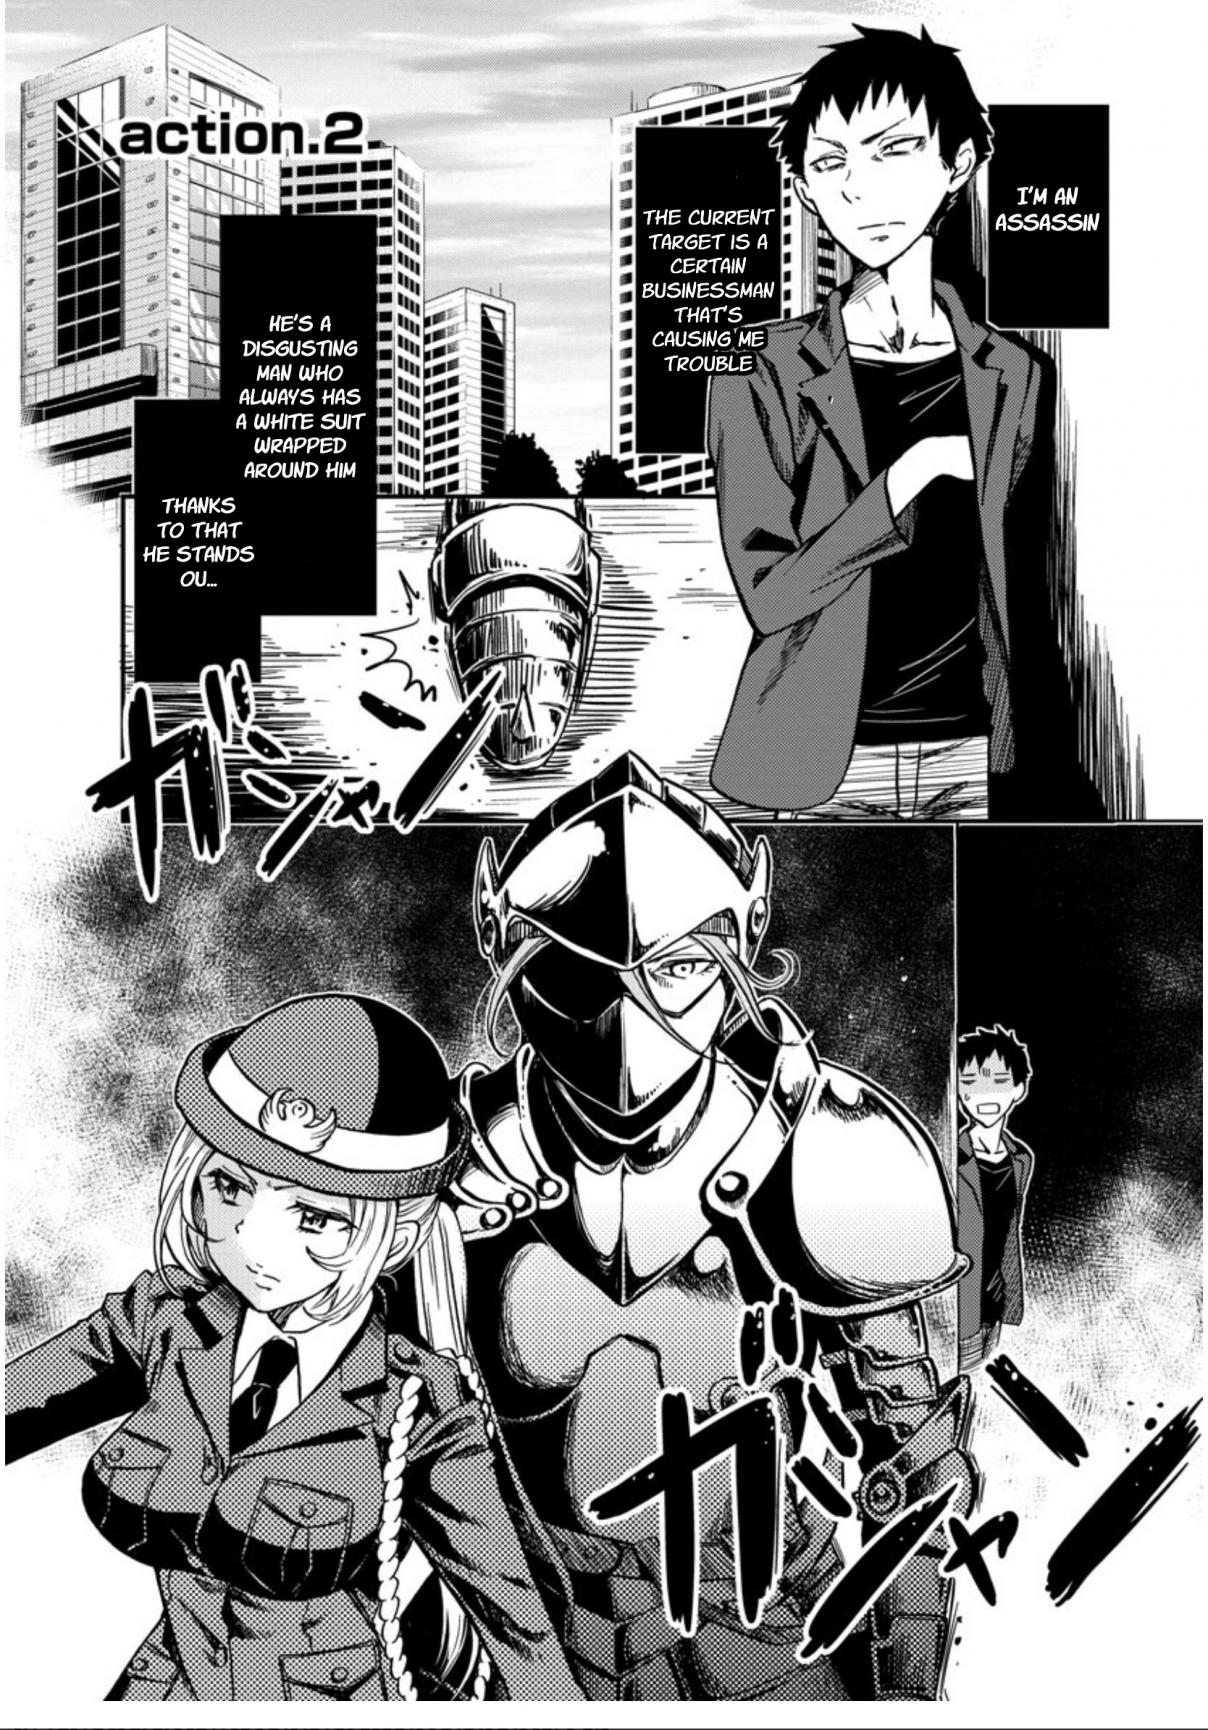 Policewoman and Assassin Vol. 1 Ch. 2 action. 2